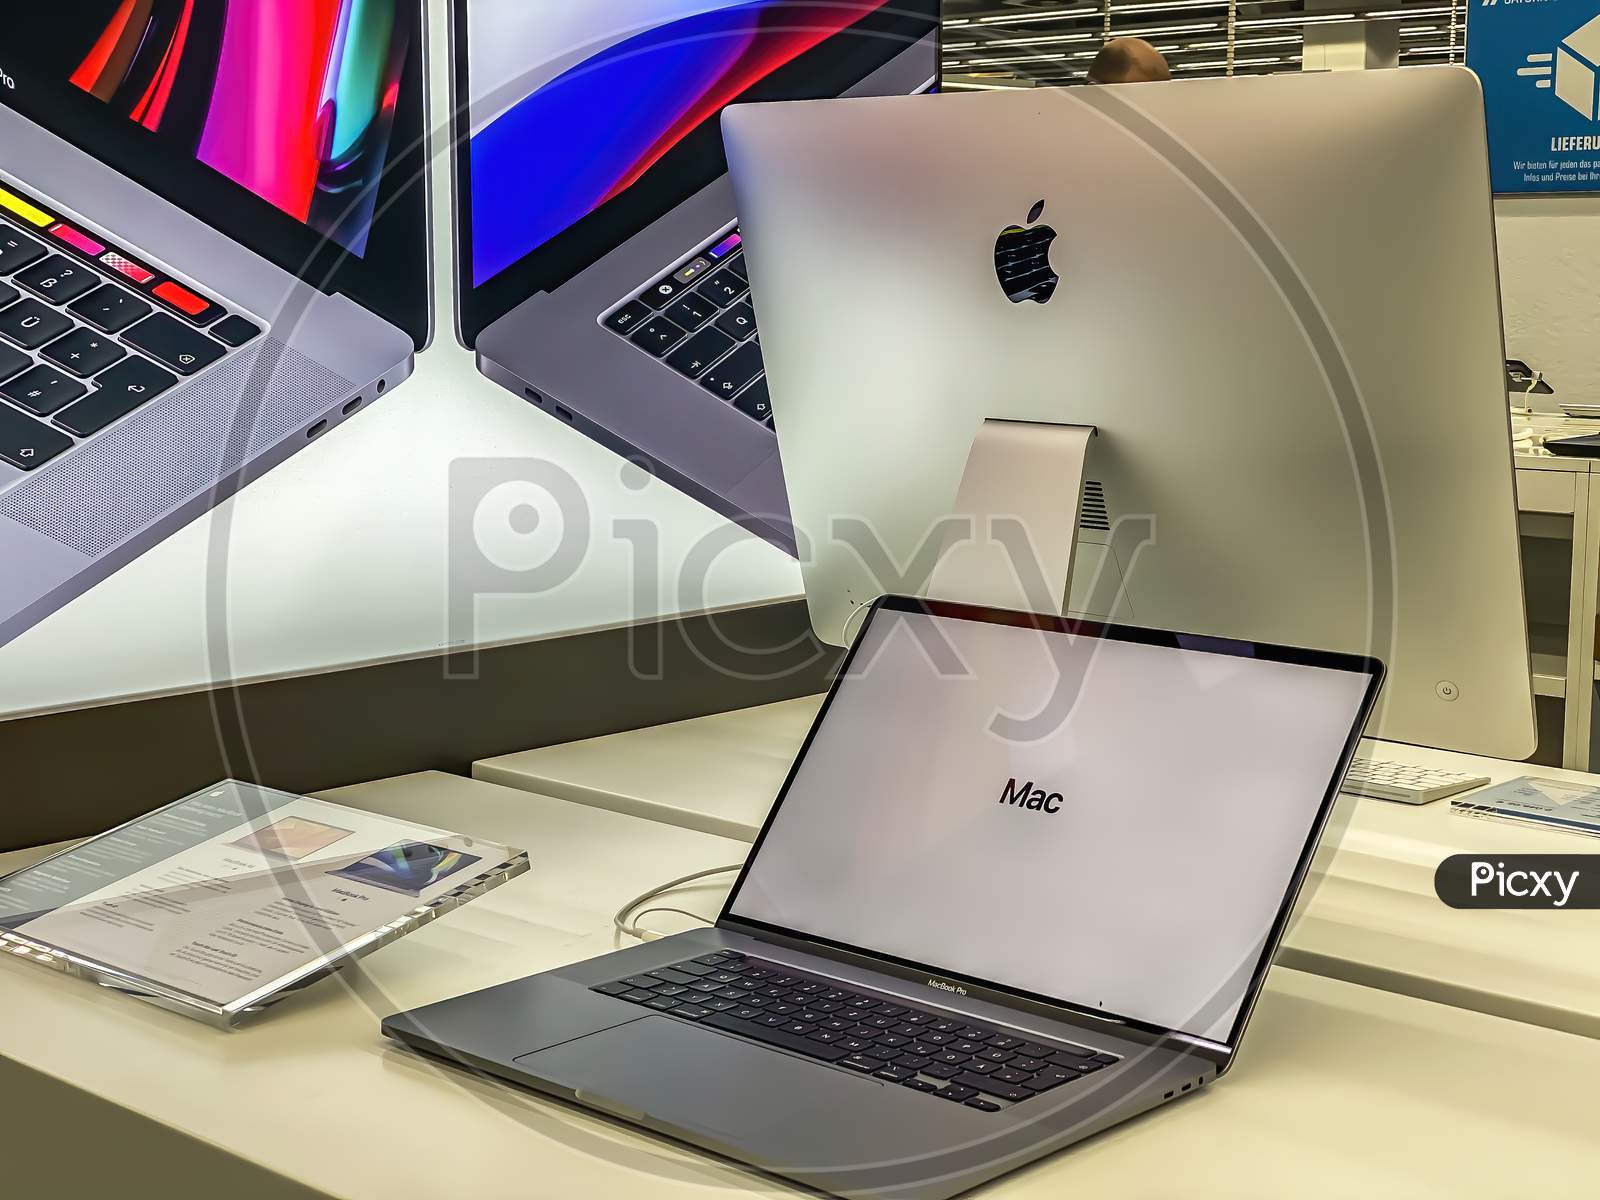 Darmstadt, Germany - September 16th 2020: A German photographer visiting Loop5, the biggest shopping mall in Hesse, taking pictures of the new MacBook Pro from Apple in a Saturn market.